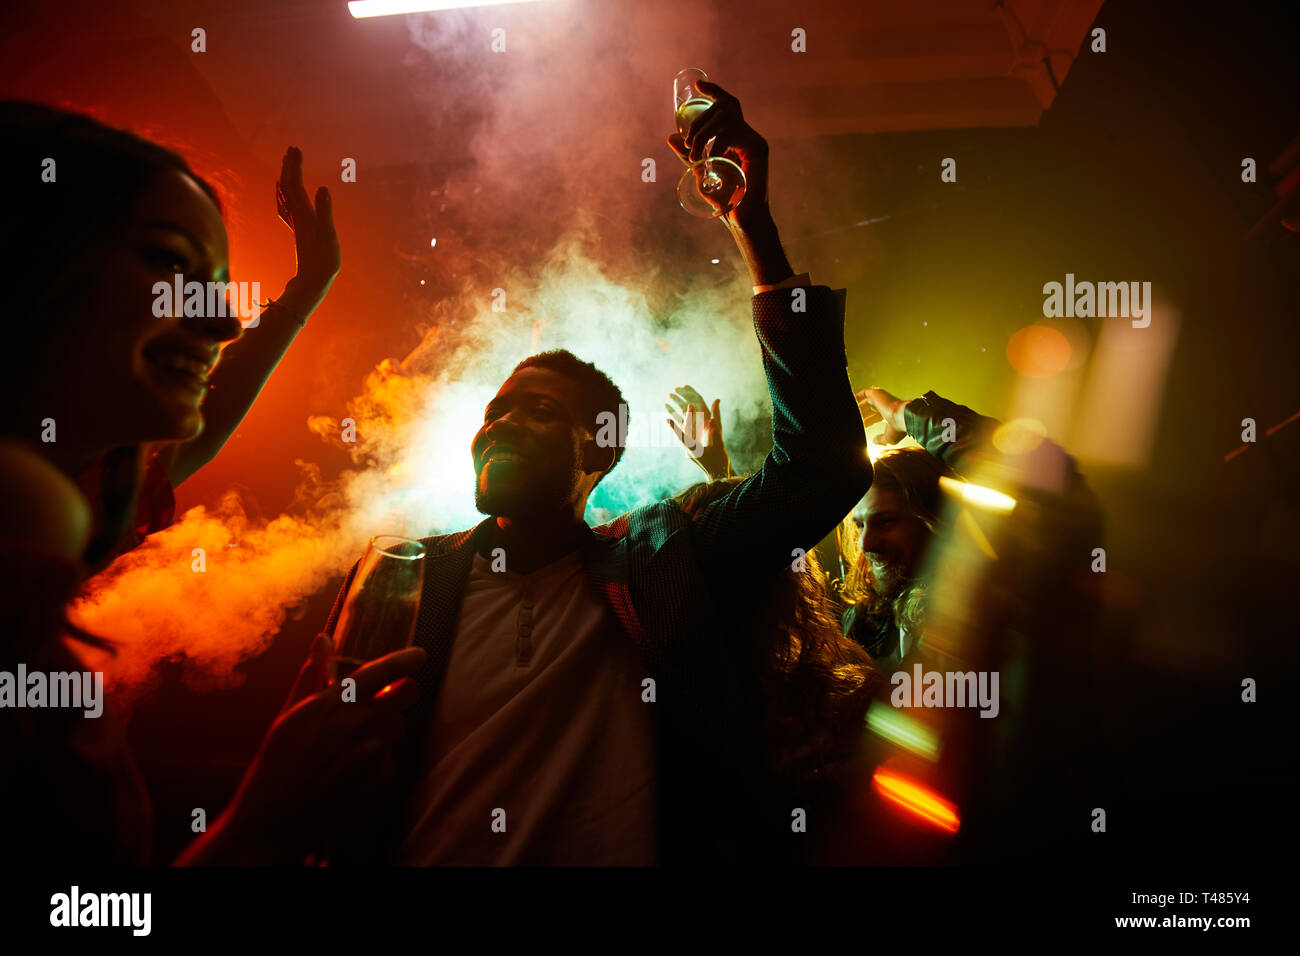 Crowd of cheerful hilarious young multiethnic people drinking alcohol and dancing in smoke at noisy party Stock Photo